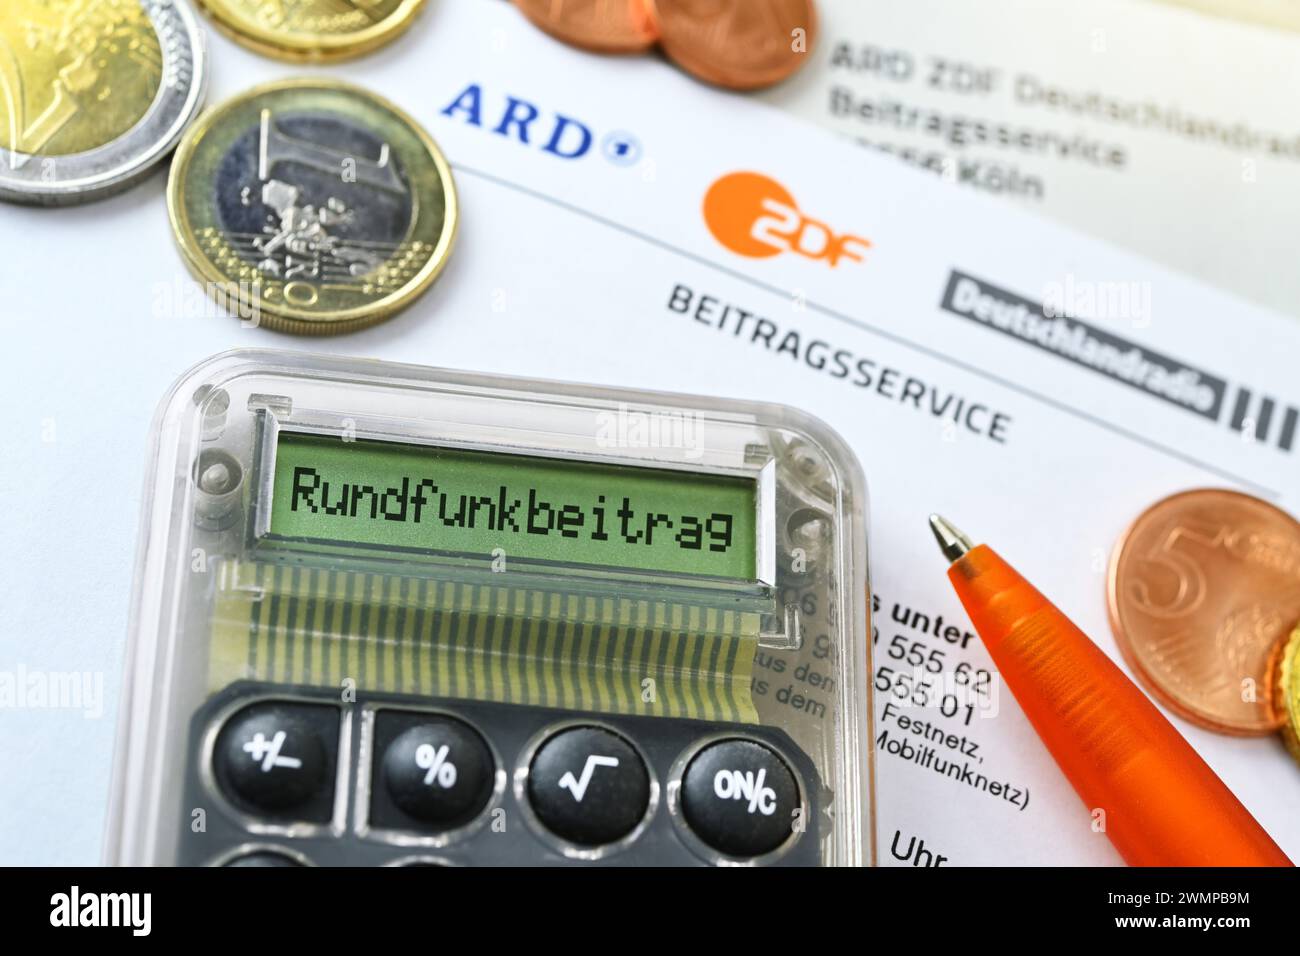 Letter From The ARD ZDF Deutschlandradio Beitragsservice With Calculator And Inscription 'Rundfunkbeitrag', Symbolic Photo Of The Increase In The Broa Stock Photo